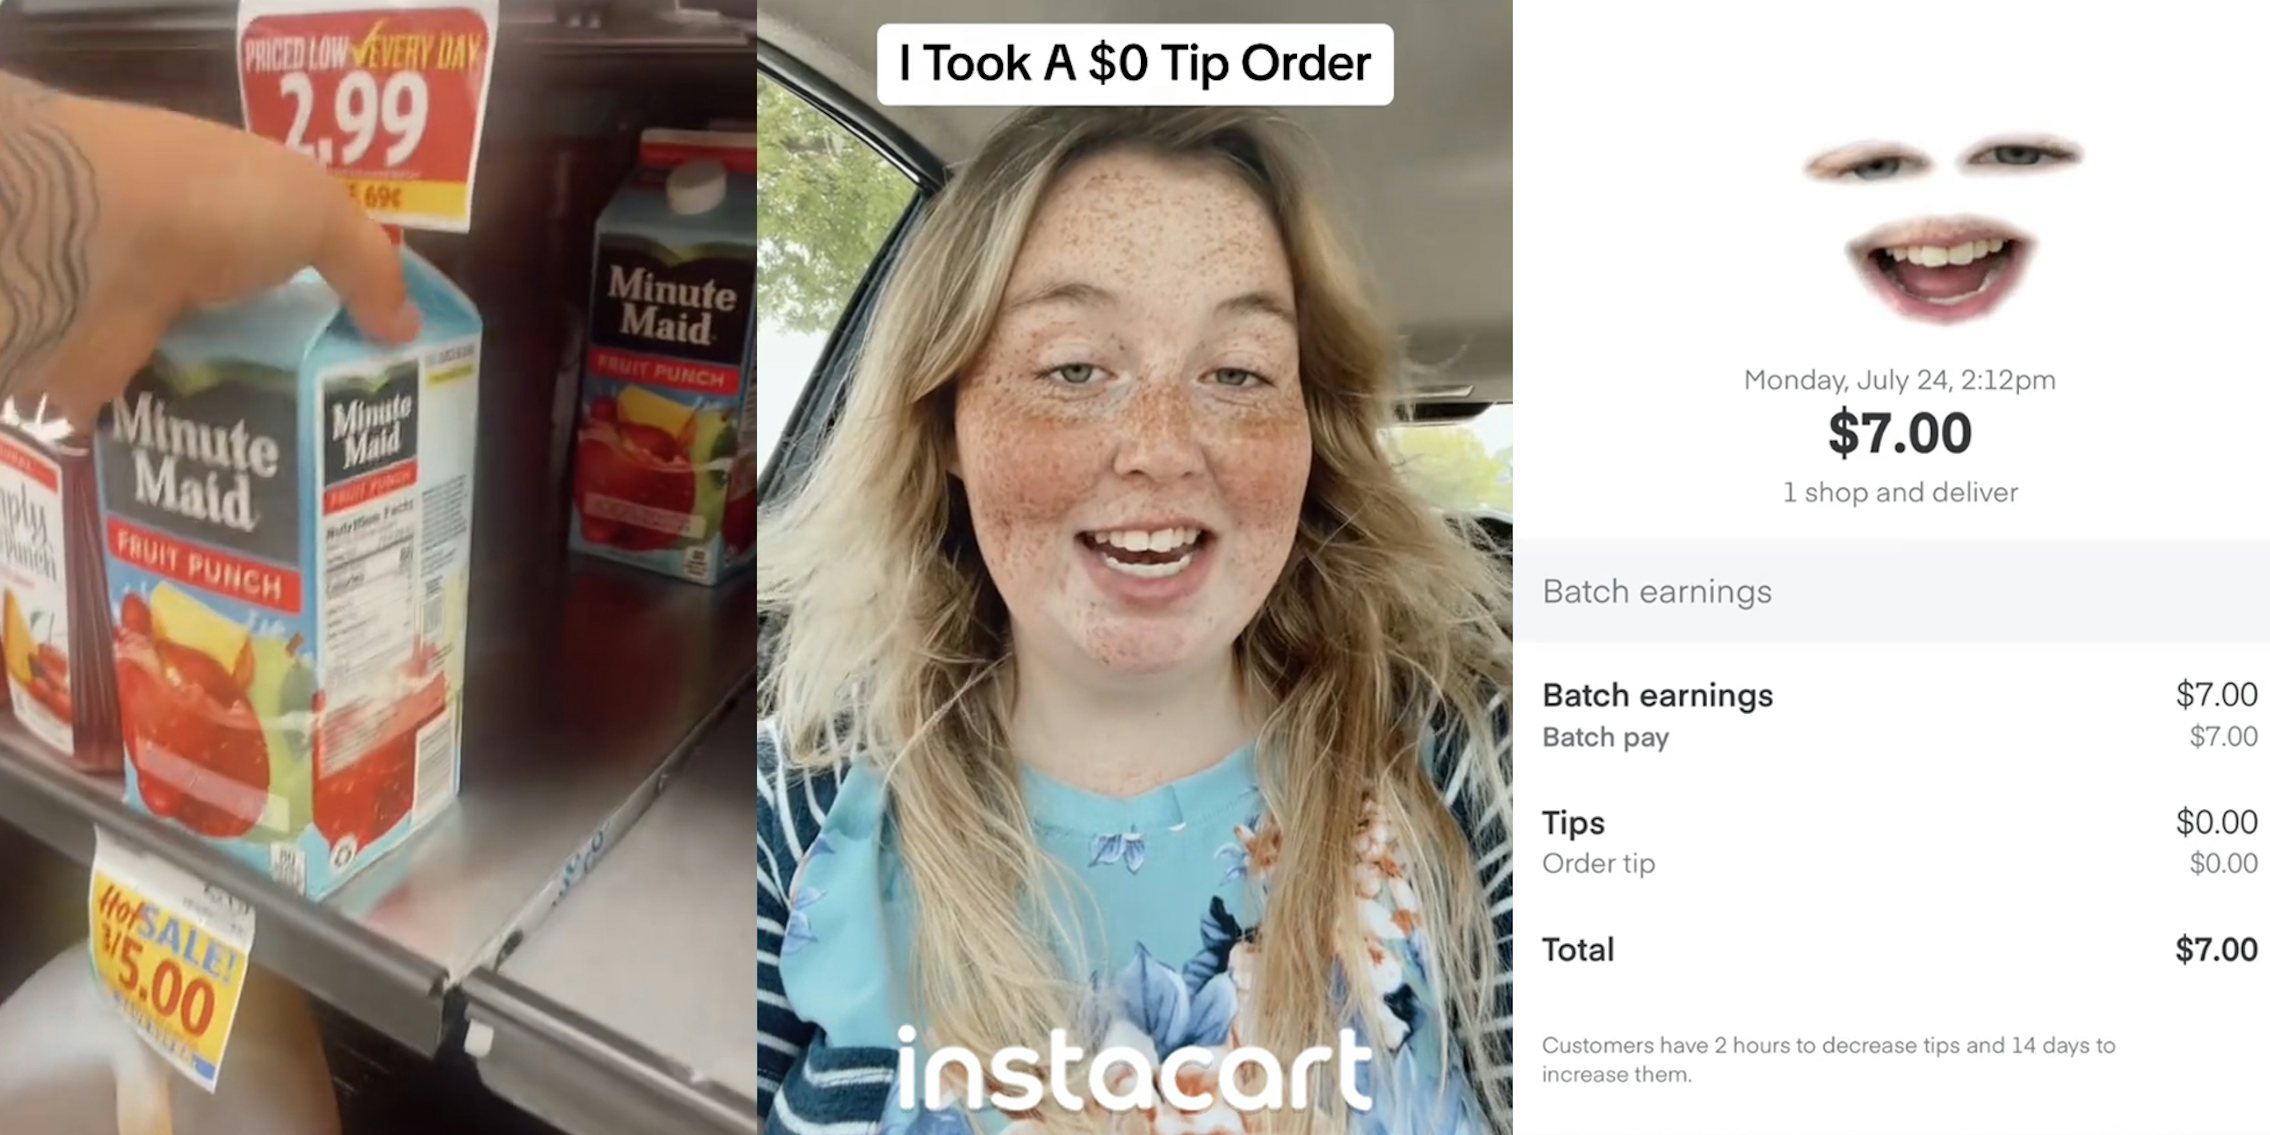 Instacart shopper grabbing Minute Maid fruit punch from store fridge (l) Instacart shopper speaking in car with caption 'I Took A $0 Tip Order' with Instacart logo at bottom (c) Instacart shopper eye filter over Instacart $0 tip order (r)